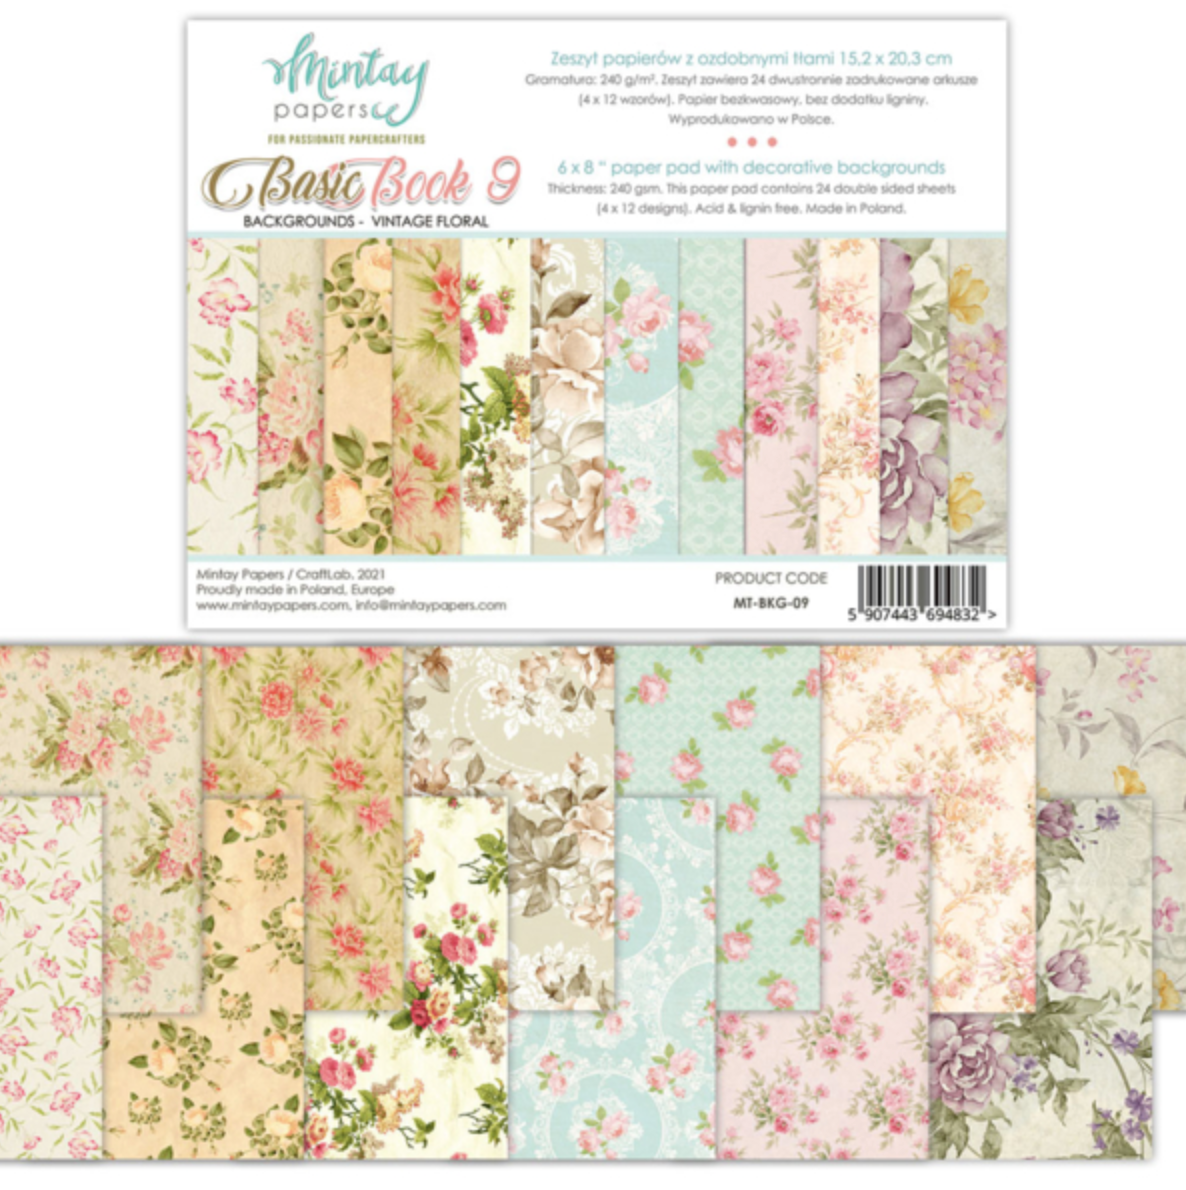 Mintay Papers - 6X8 Basic Book 9 - Backgrounds Vintage Floral